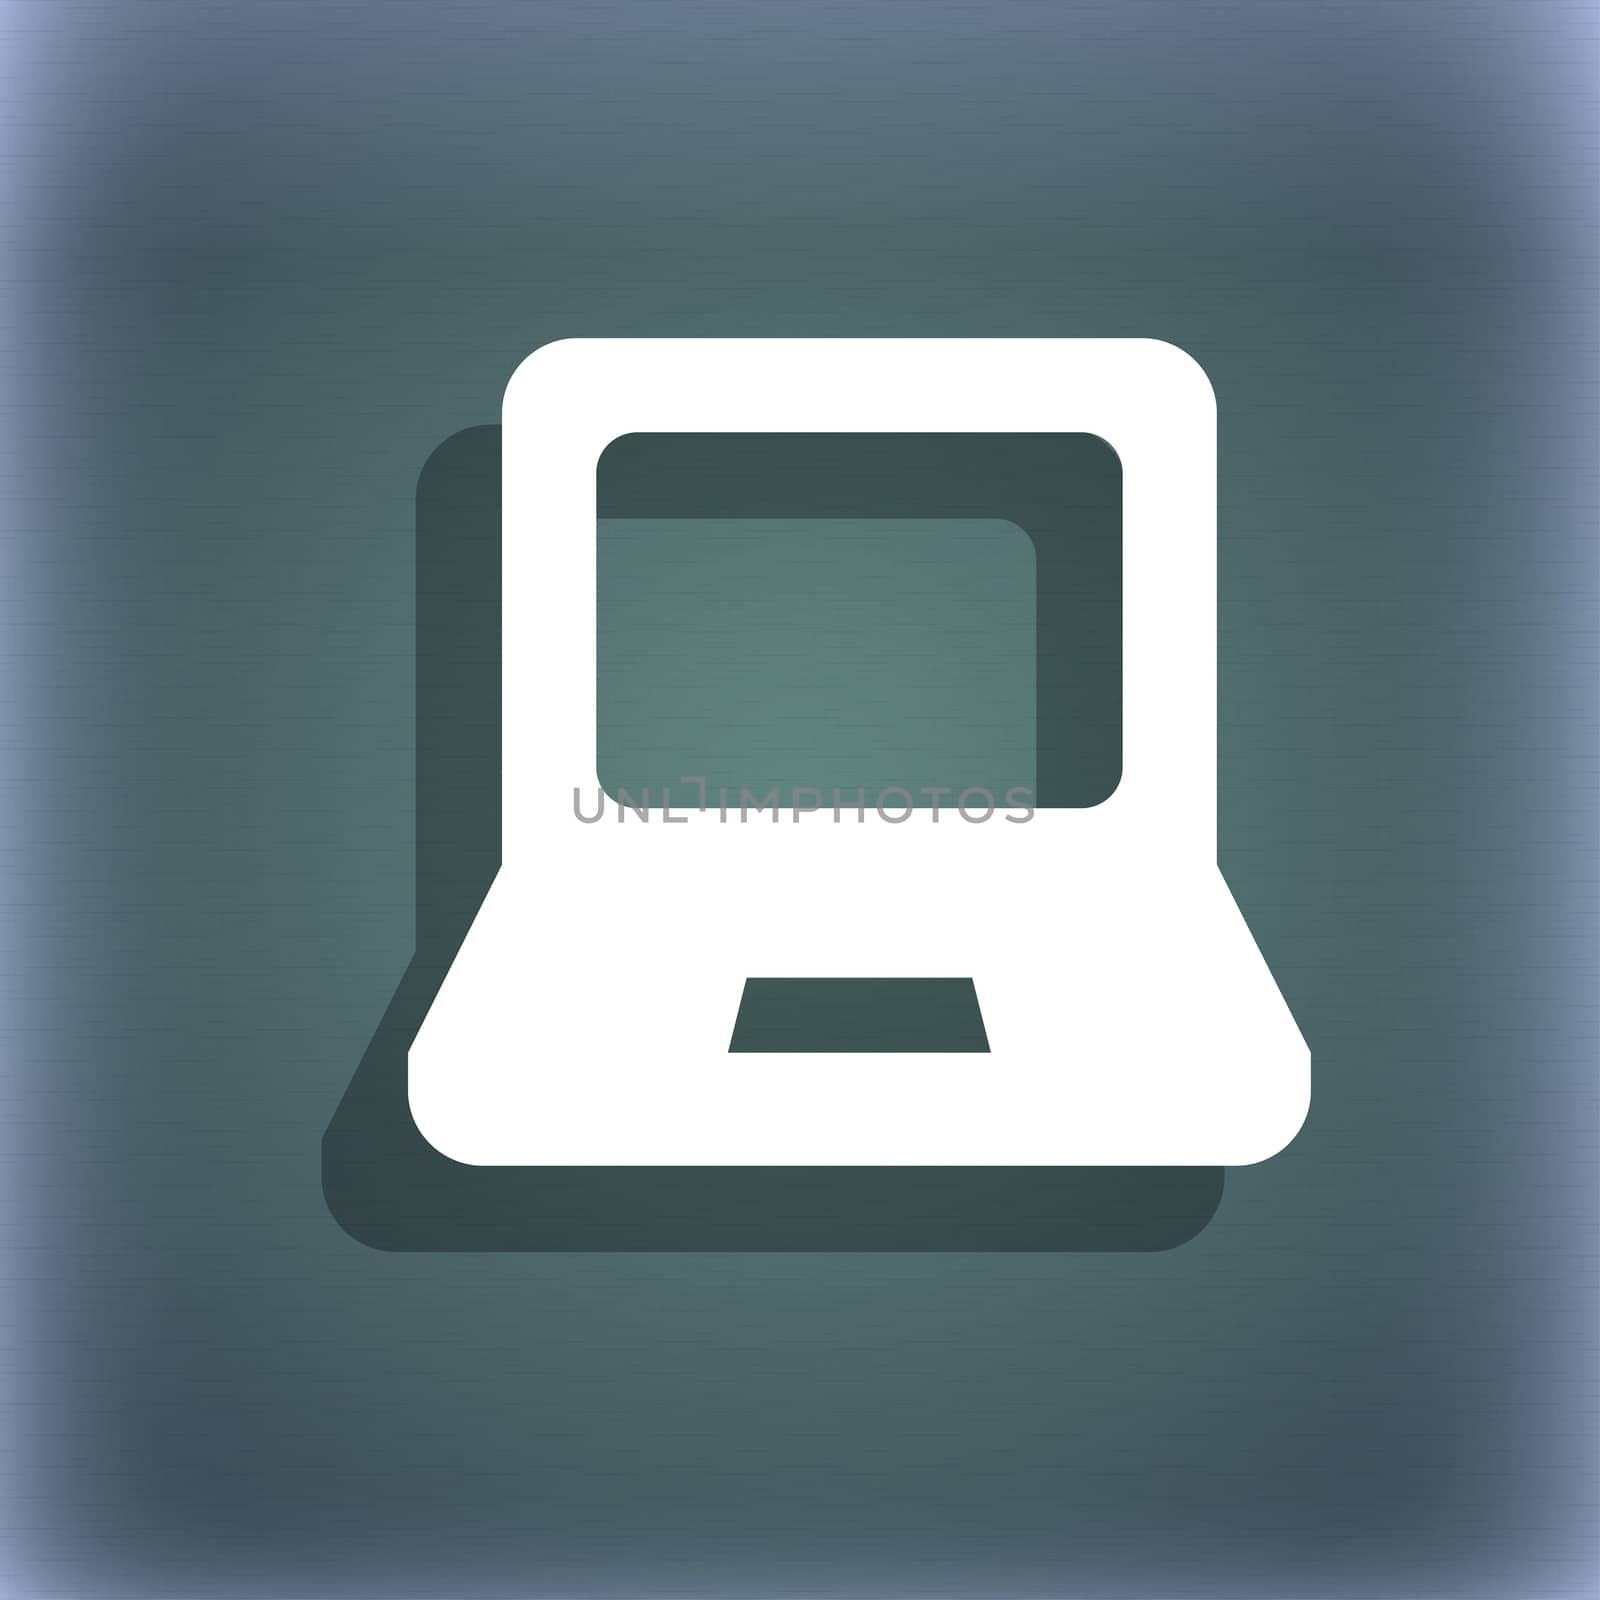 Laptop icon symbol on the blue-green abstract background with shadow and space for your text. illustration